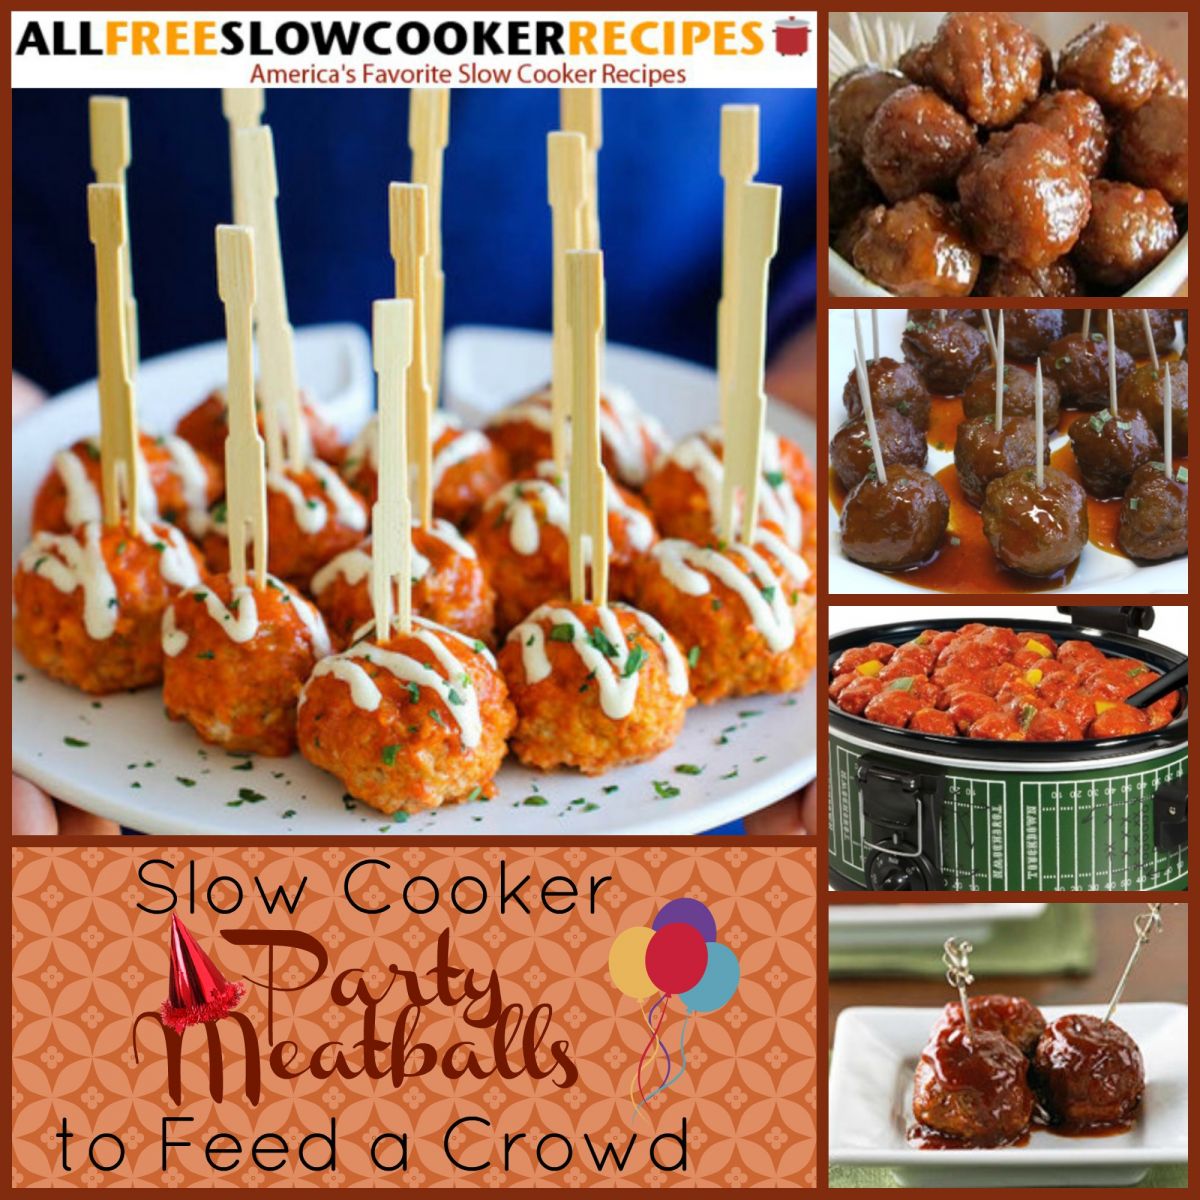 Slow Cooker Party Meatballs & Appetizers